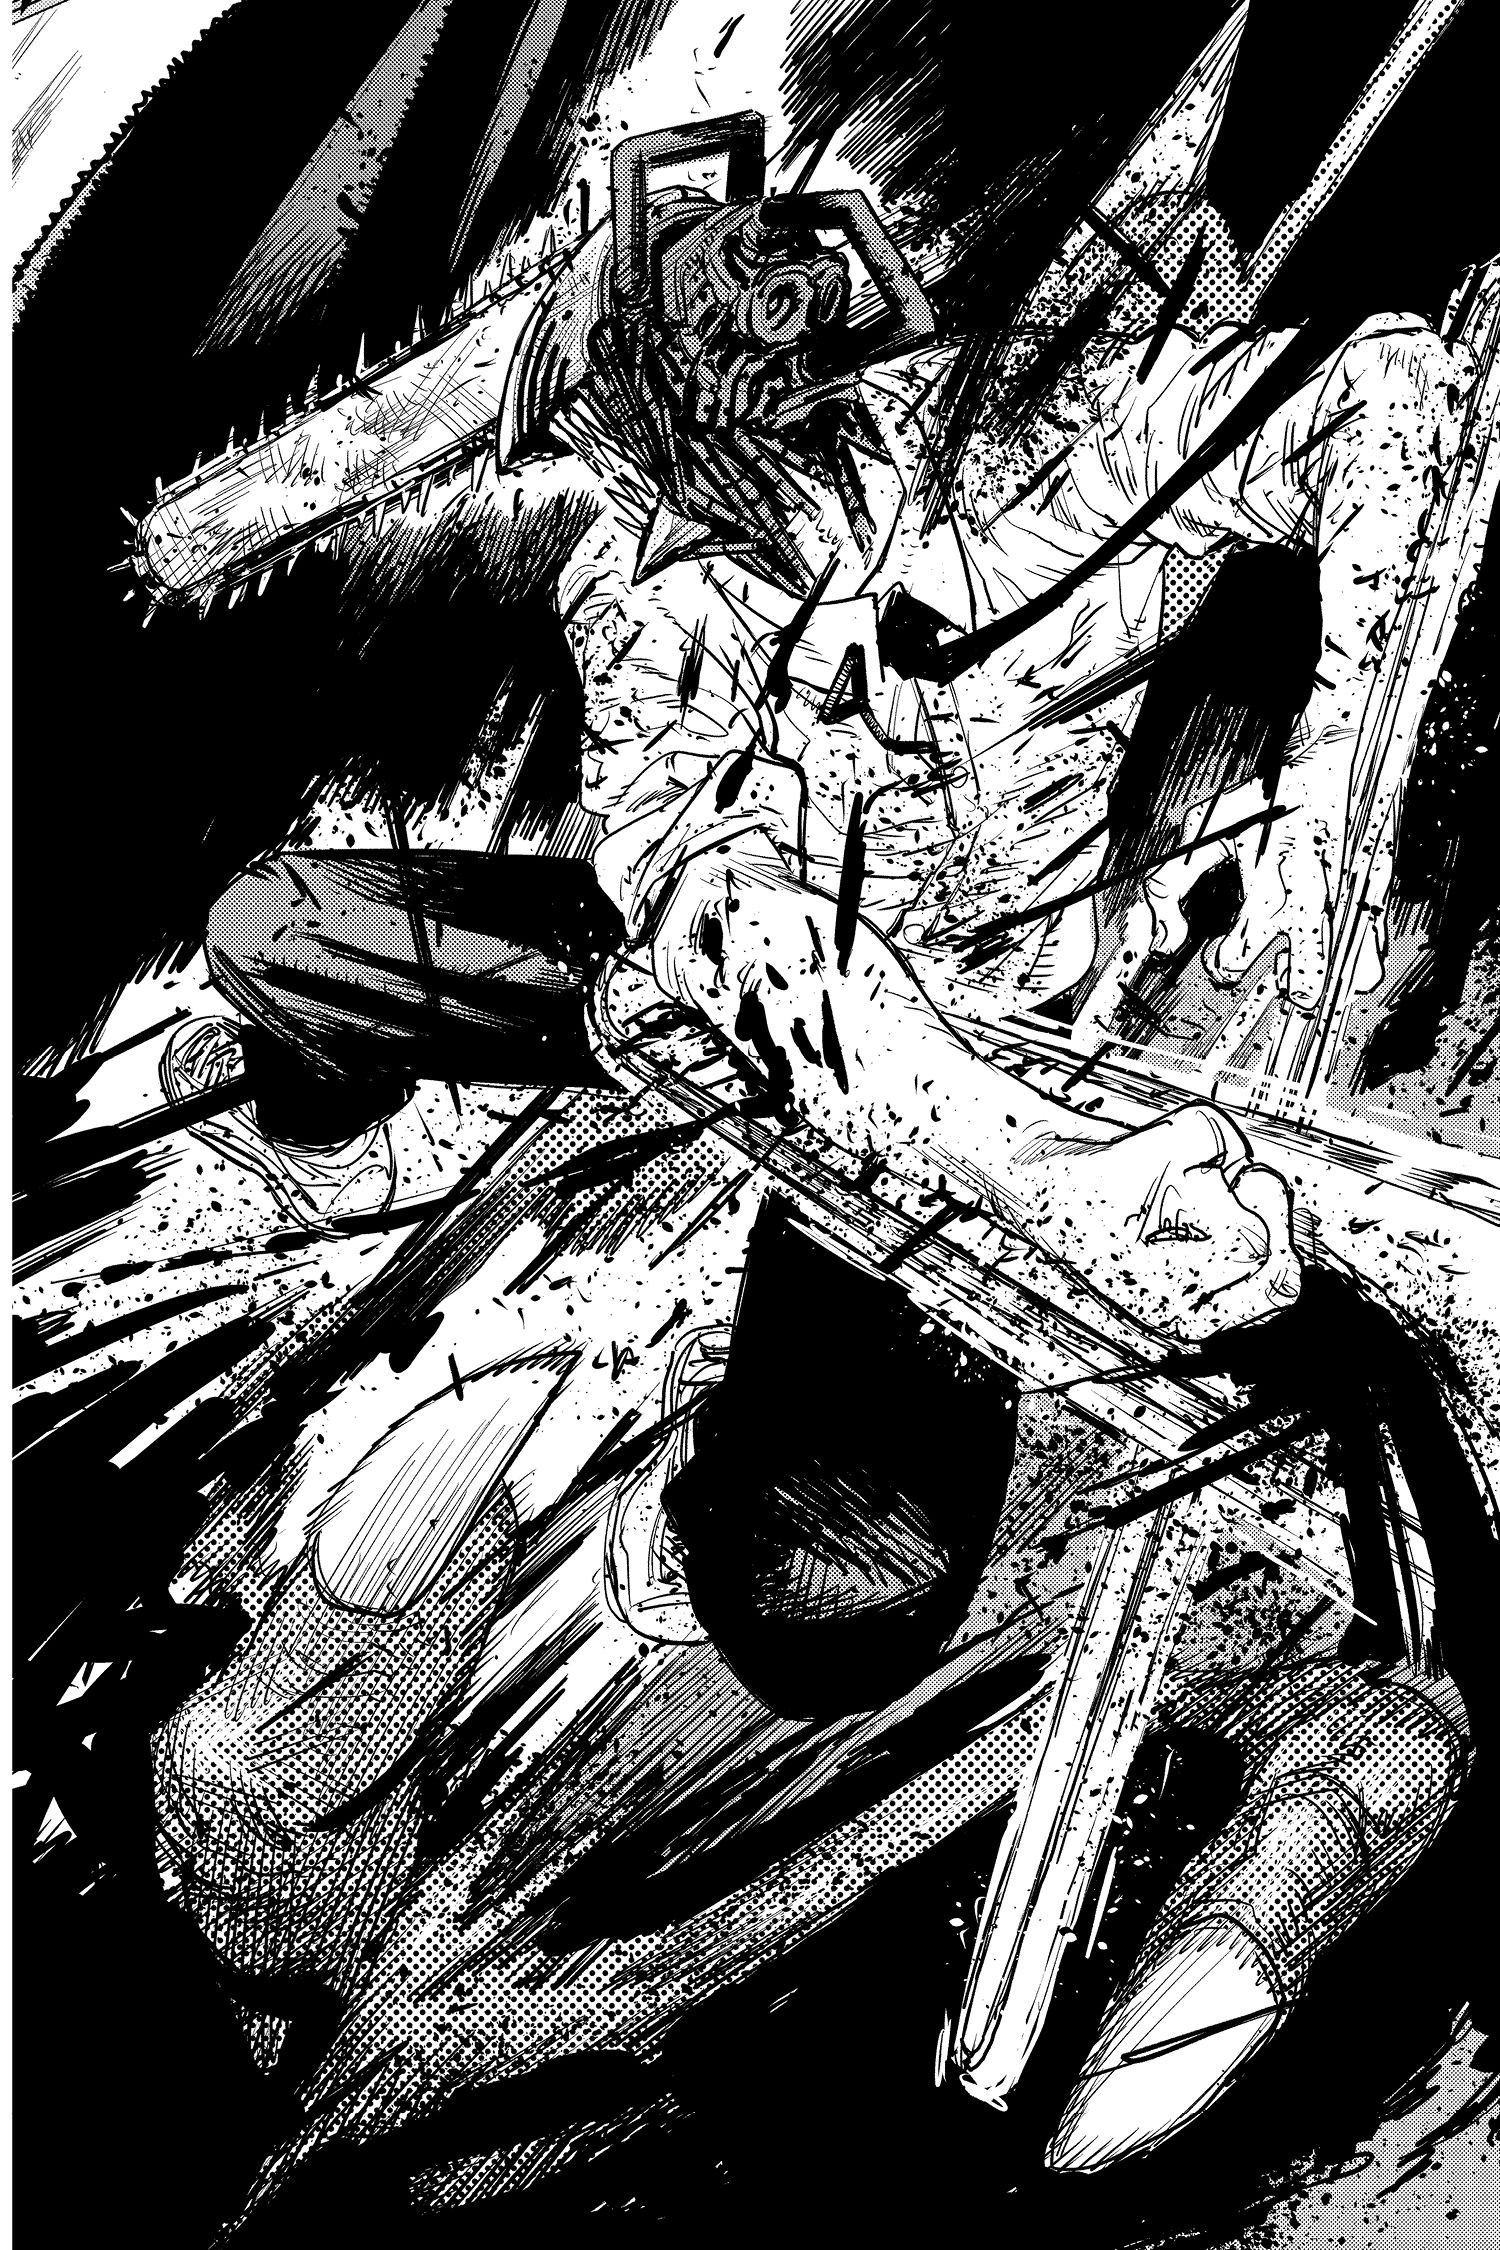 Finally, There's A Manga About A Man With Chainsaw Hands